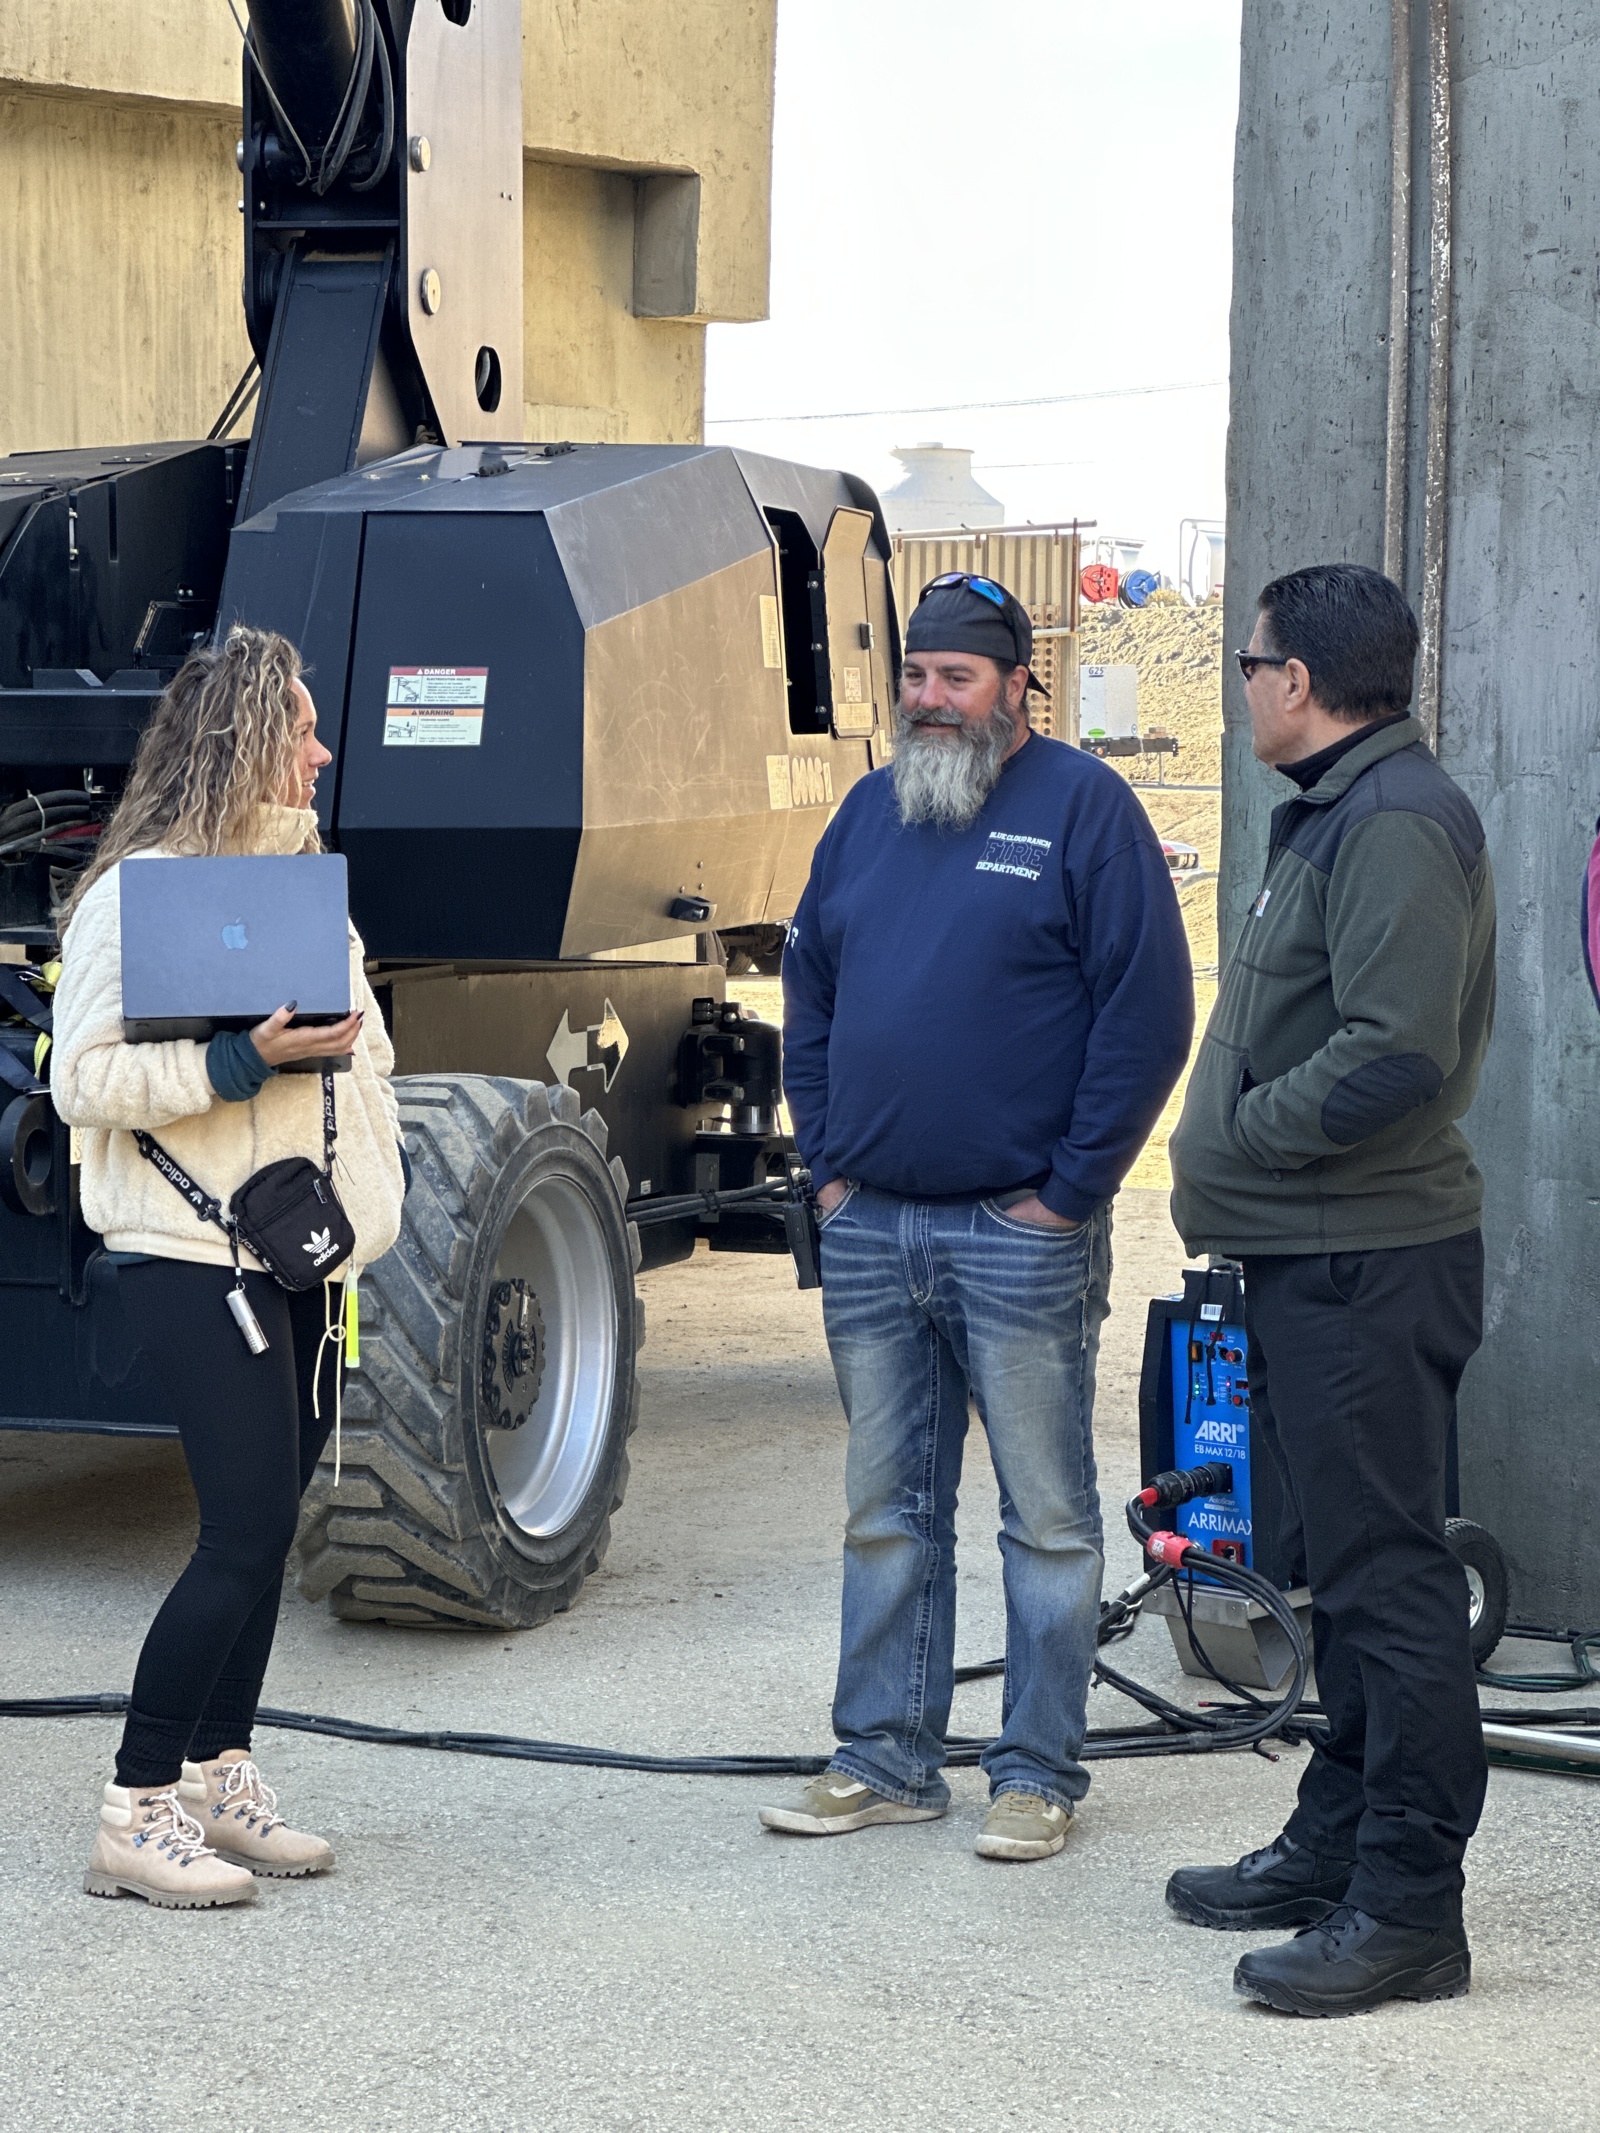 Man wearing black cap backwards, dark blue sweater, jeans and sneakers talking with man and woman holding a laptop on a construction site